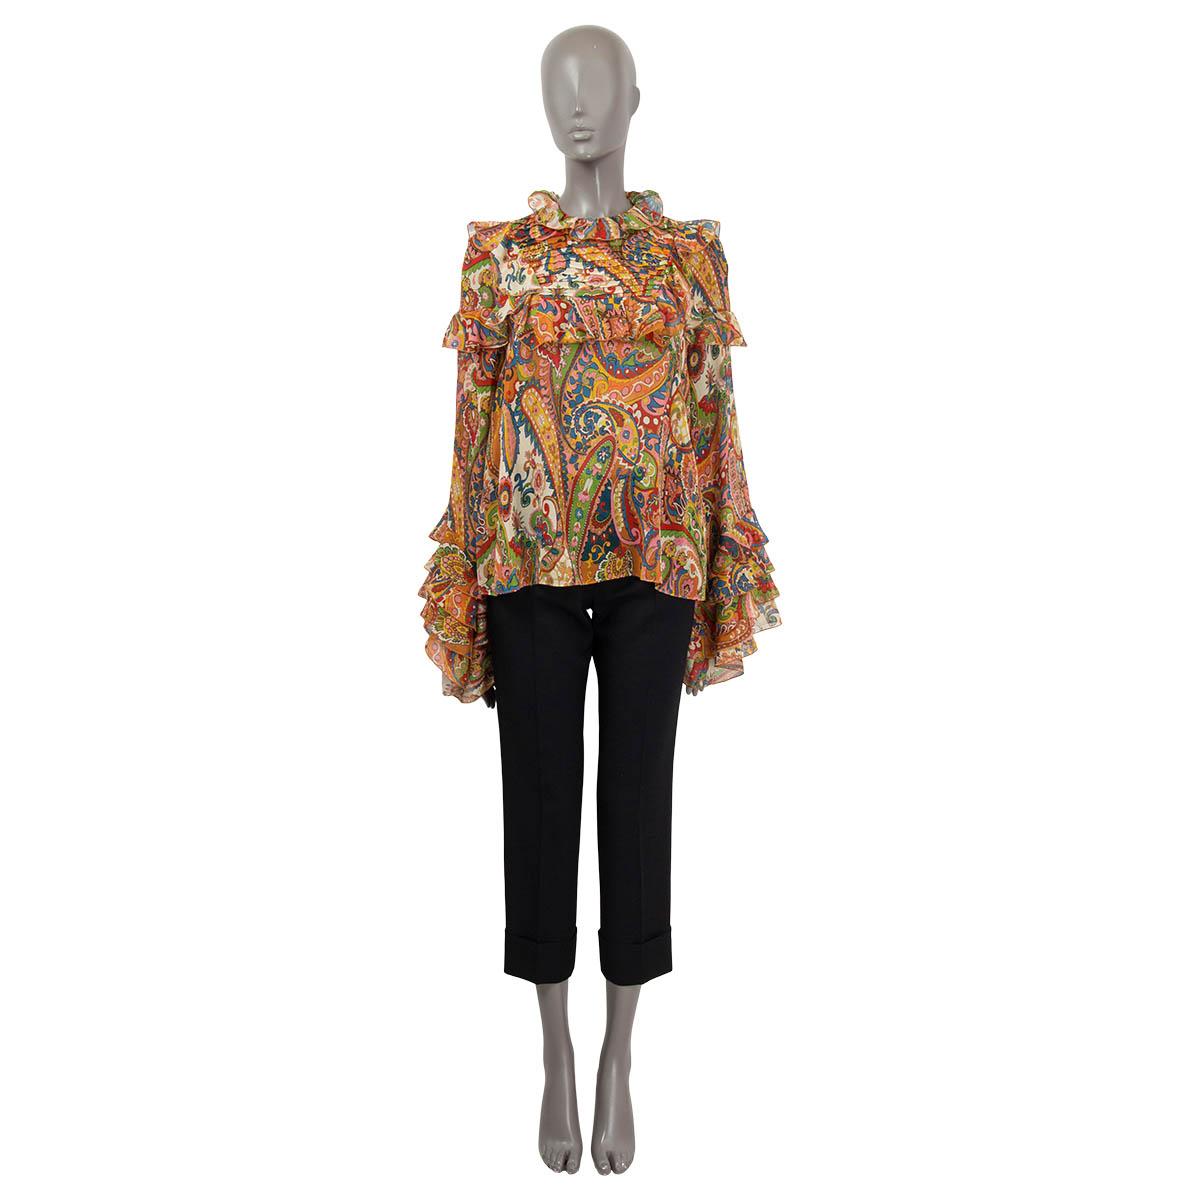 100% authentic Etro California semi sheer blouse in orange, pink, blue, red, yellow and ivory silk (100%). Features flared cuffs, ruffled details and a paisley print. Opens with a button on the back. Unlined. Has been worn and is in excellent